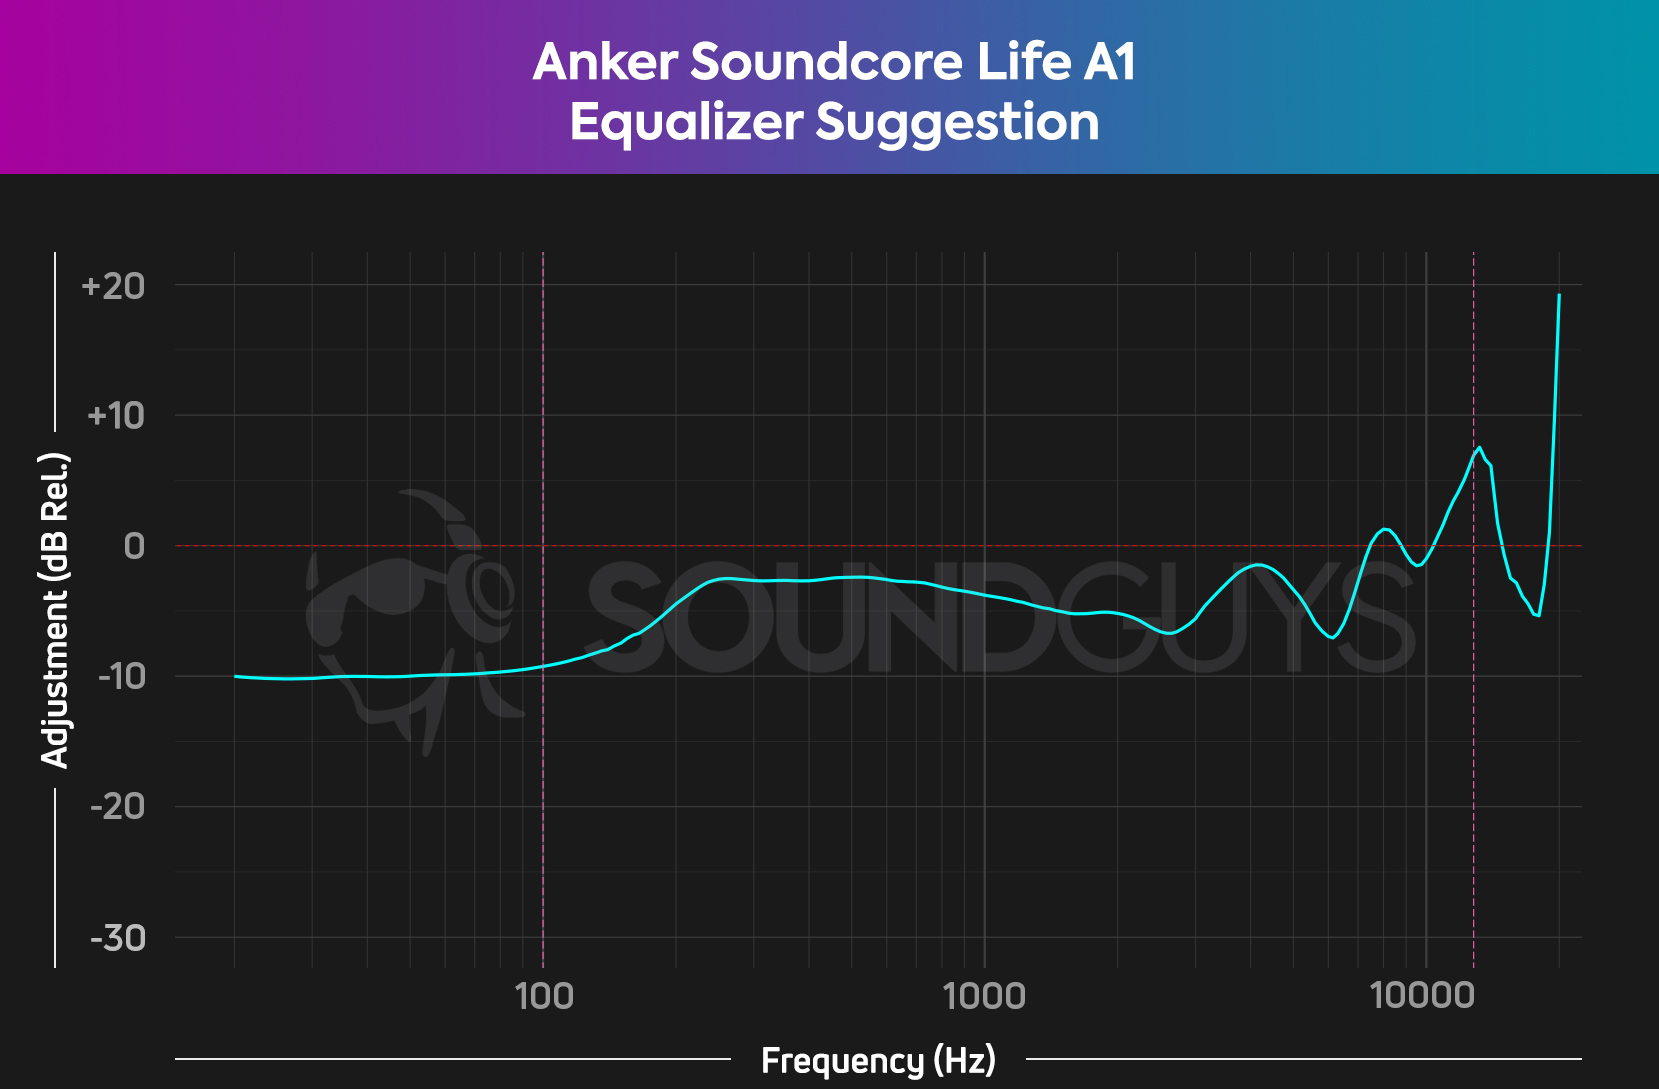 Chart shows suggested EQ settings for mobile apps with the Anker Soundcore Life A1.